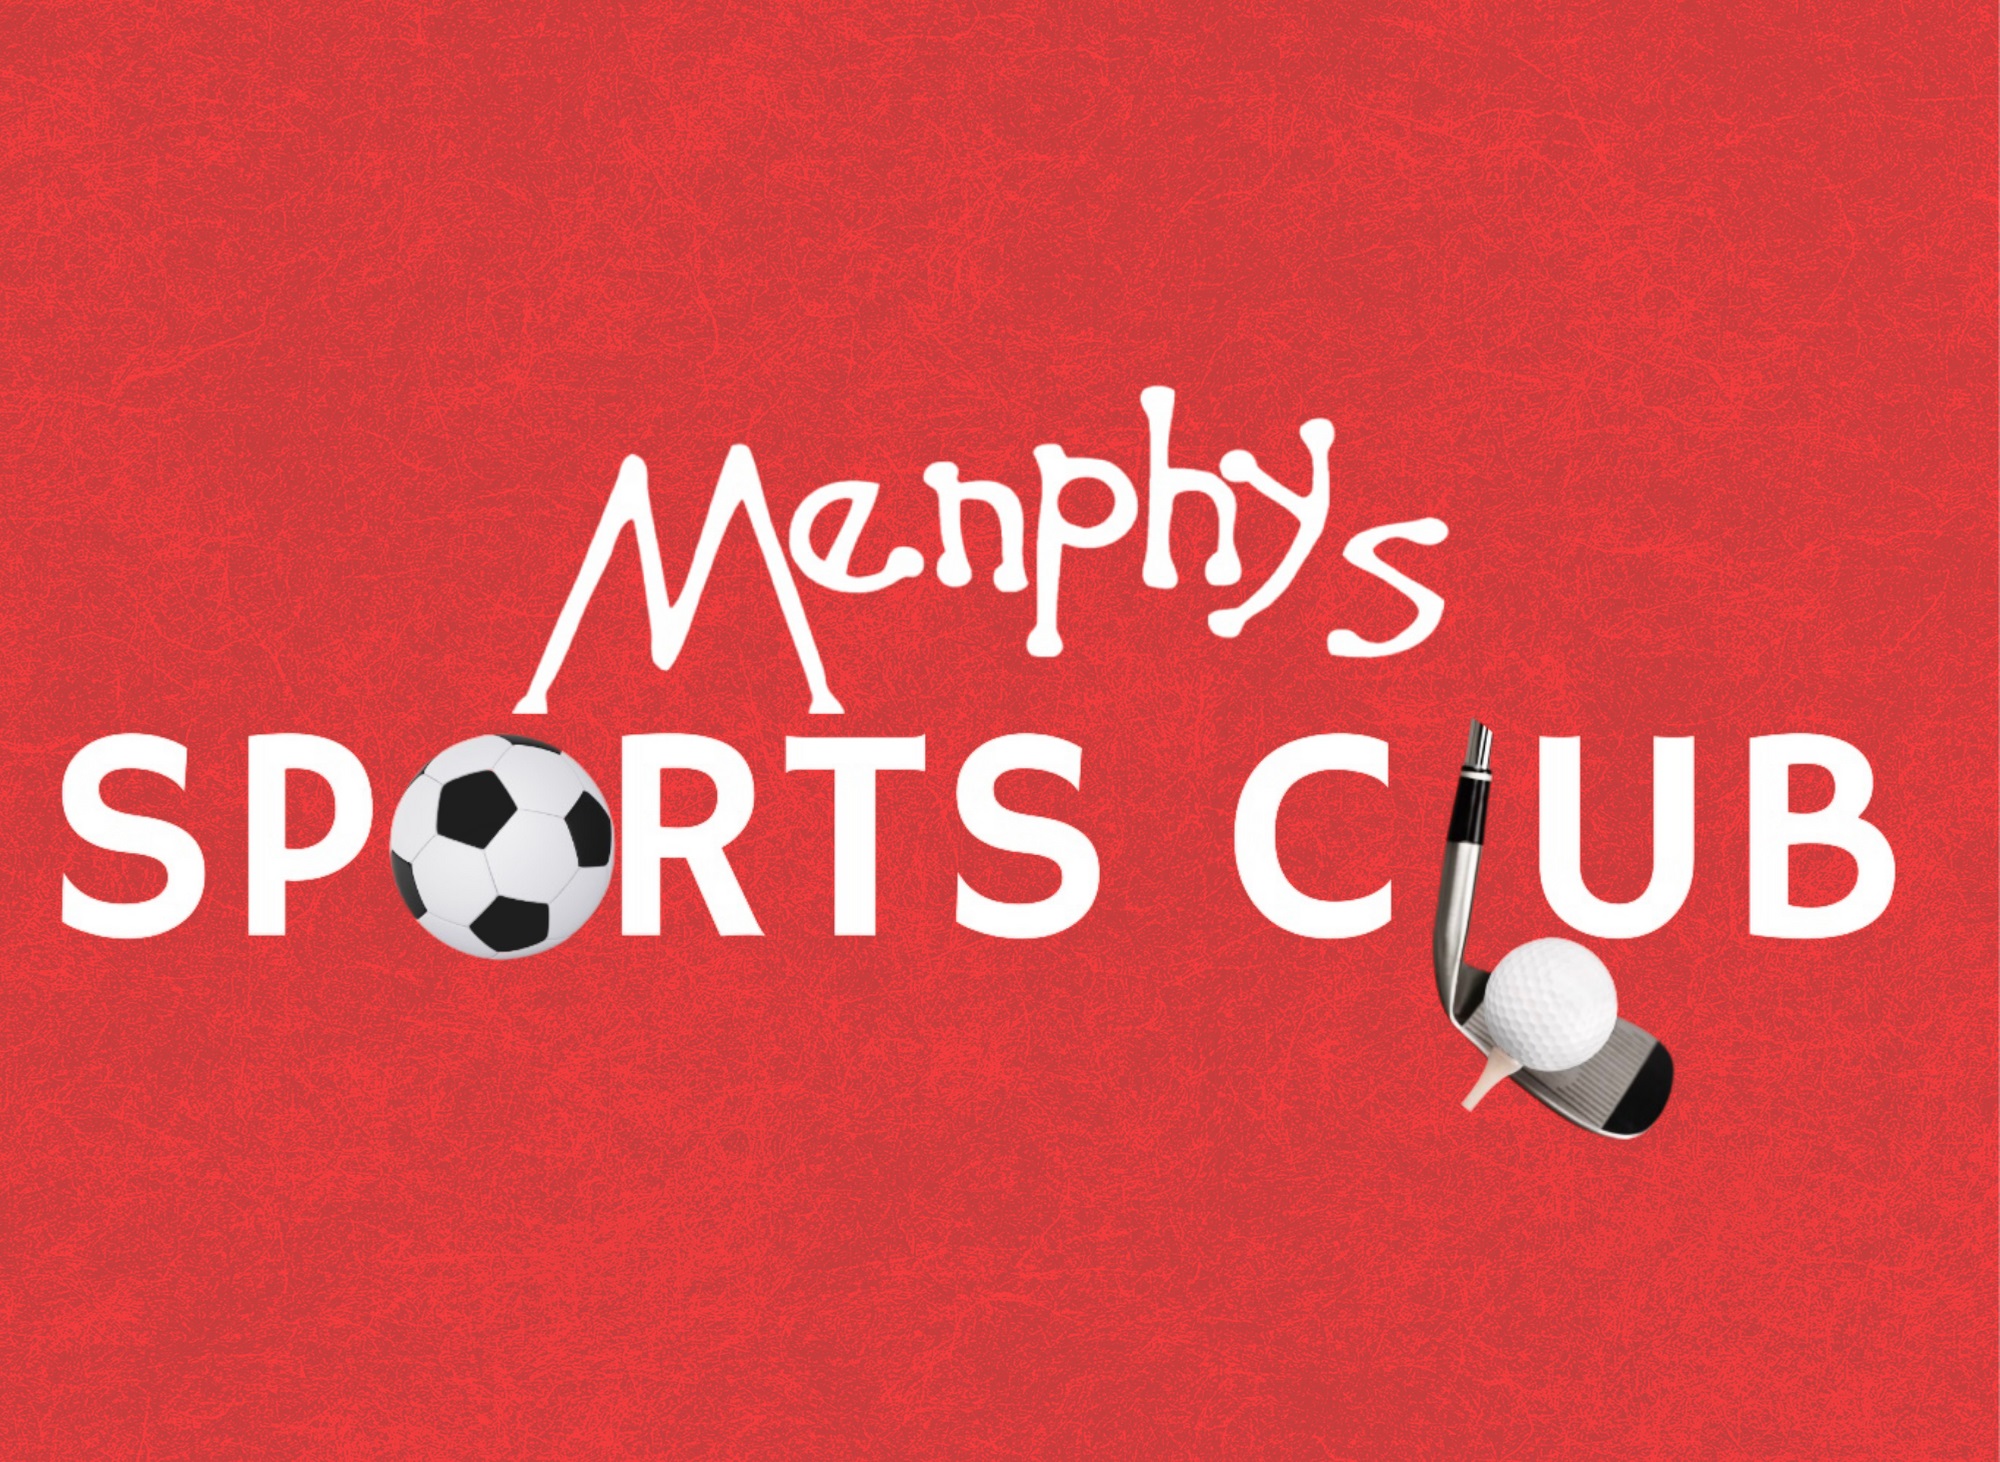 EverythingBranded Becomes Menphys Sports Club